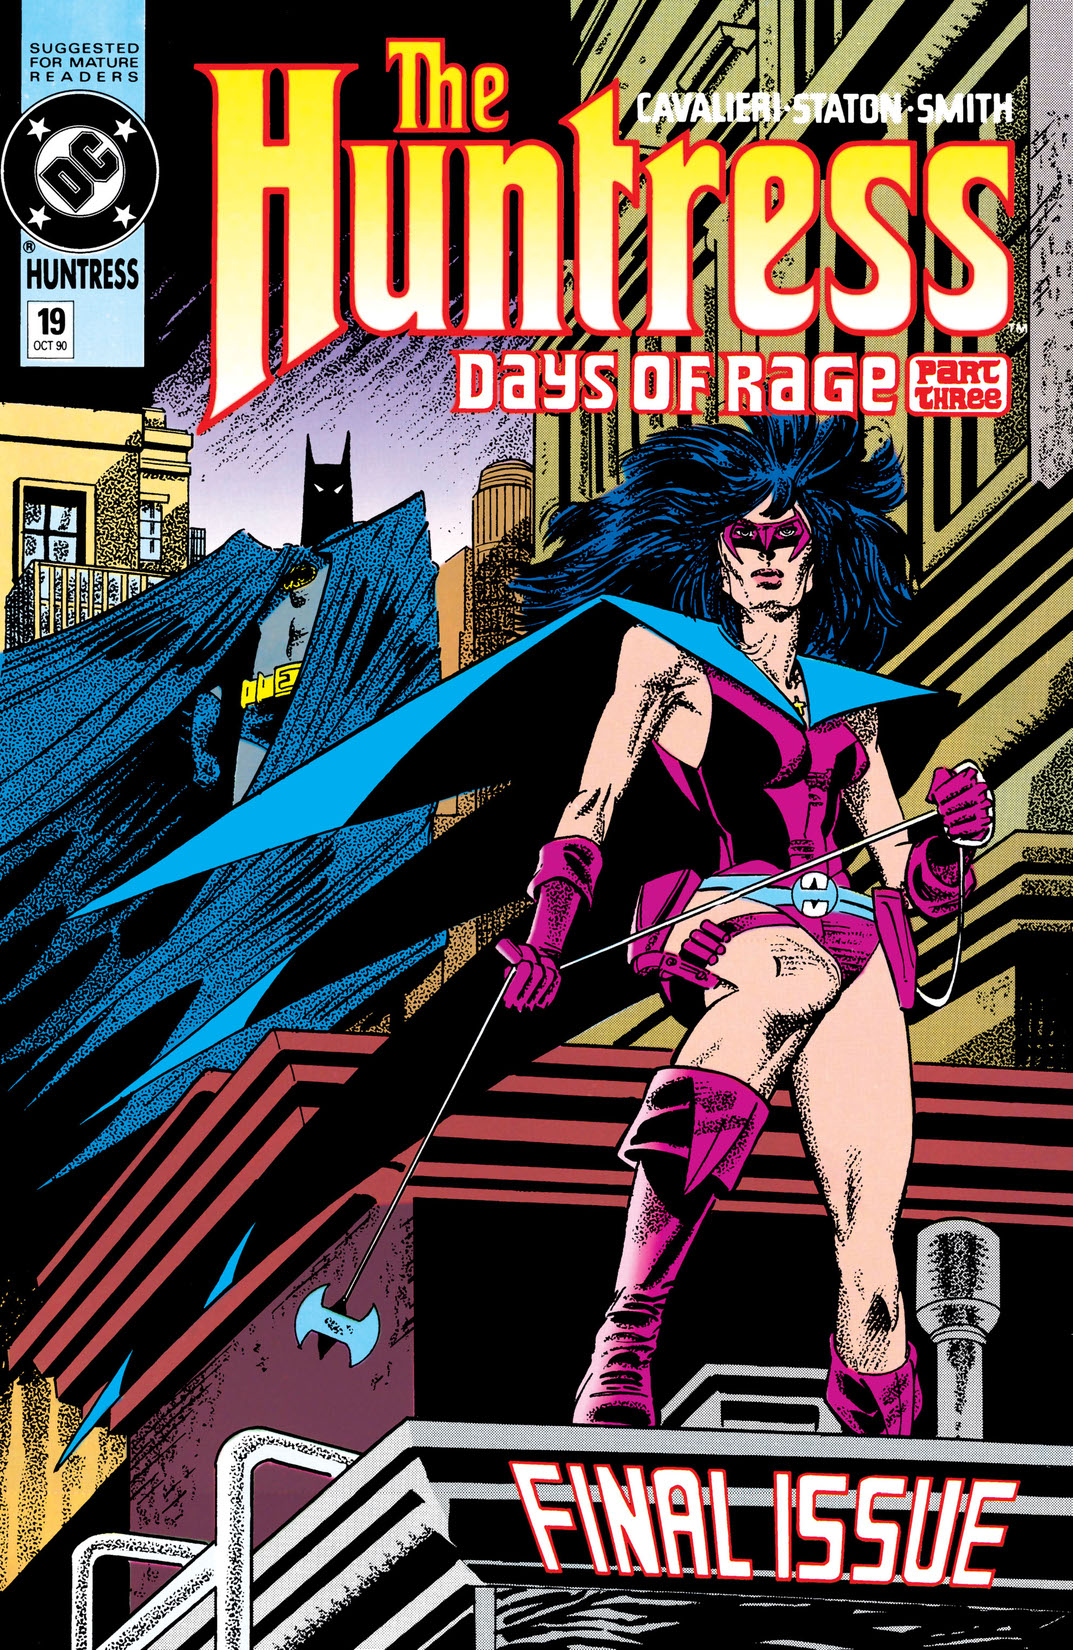 The Huntress (1989-1990) #19 preview images